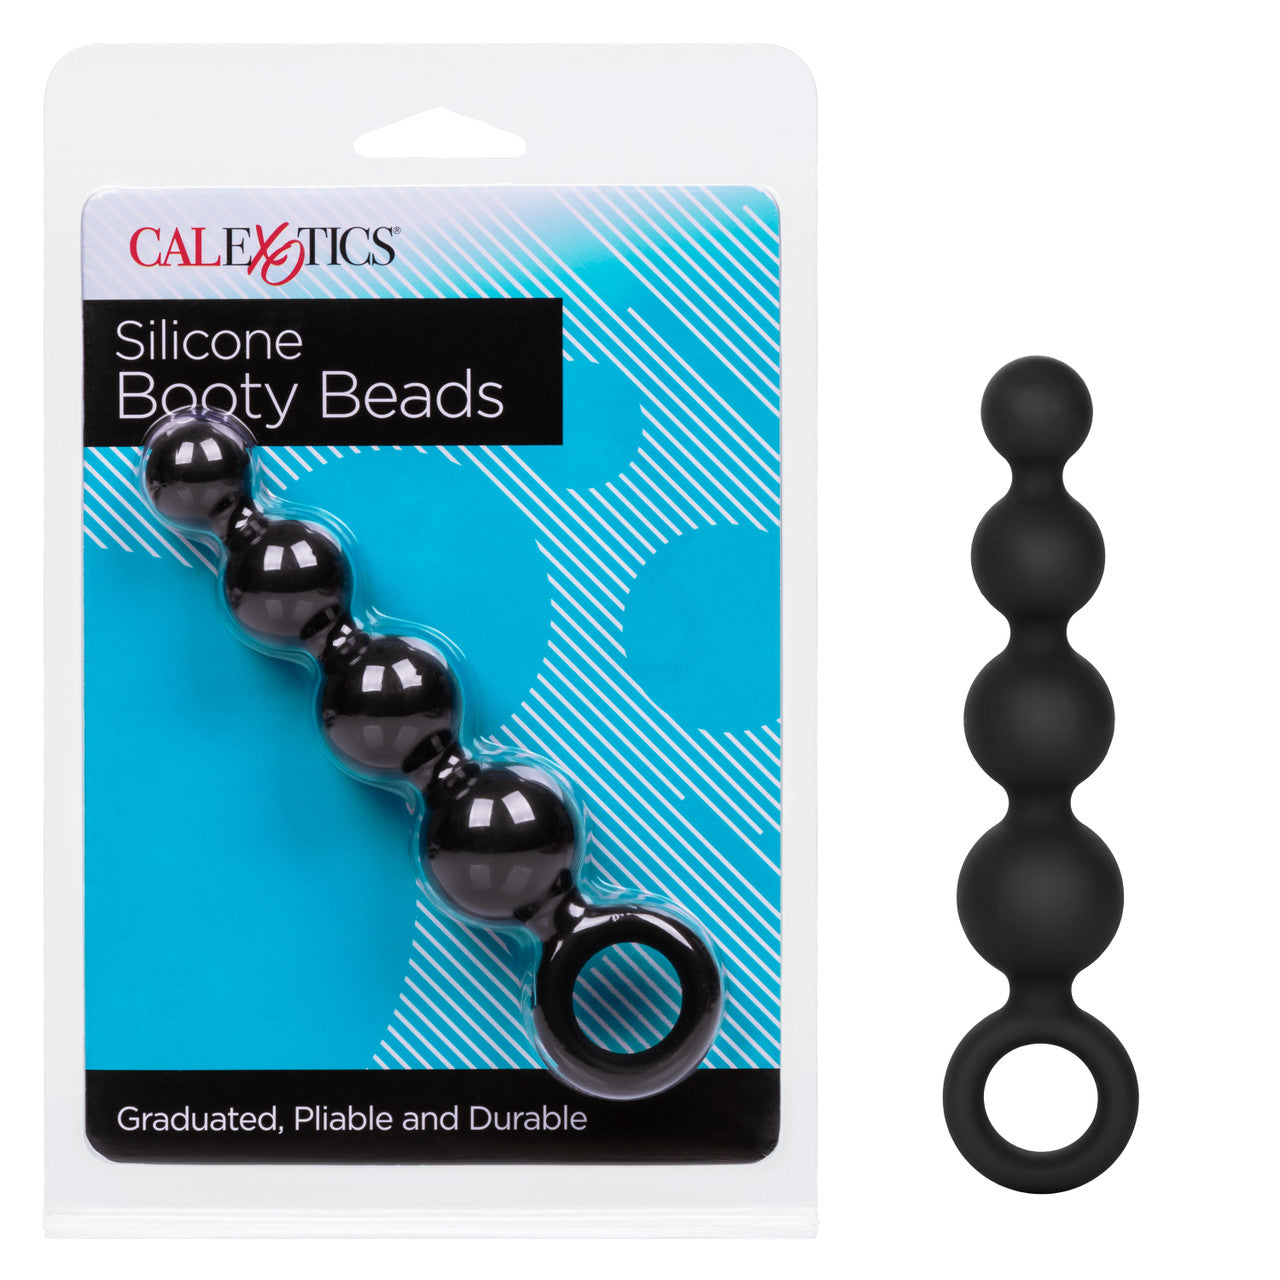 Silicone Booty Beads - Black - Thorn & Feather Sex Toy Canada